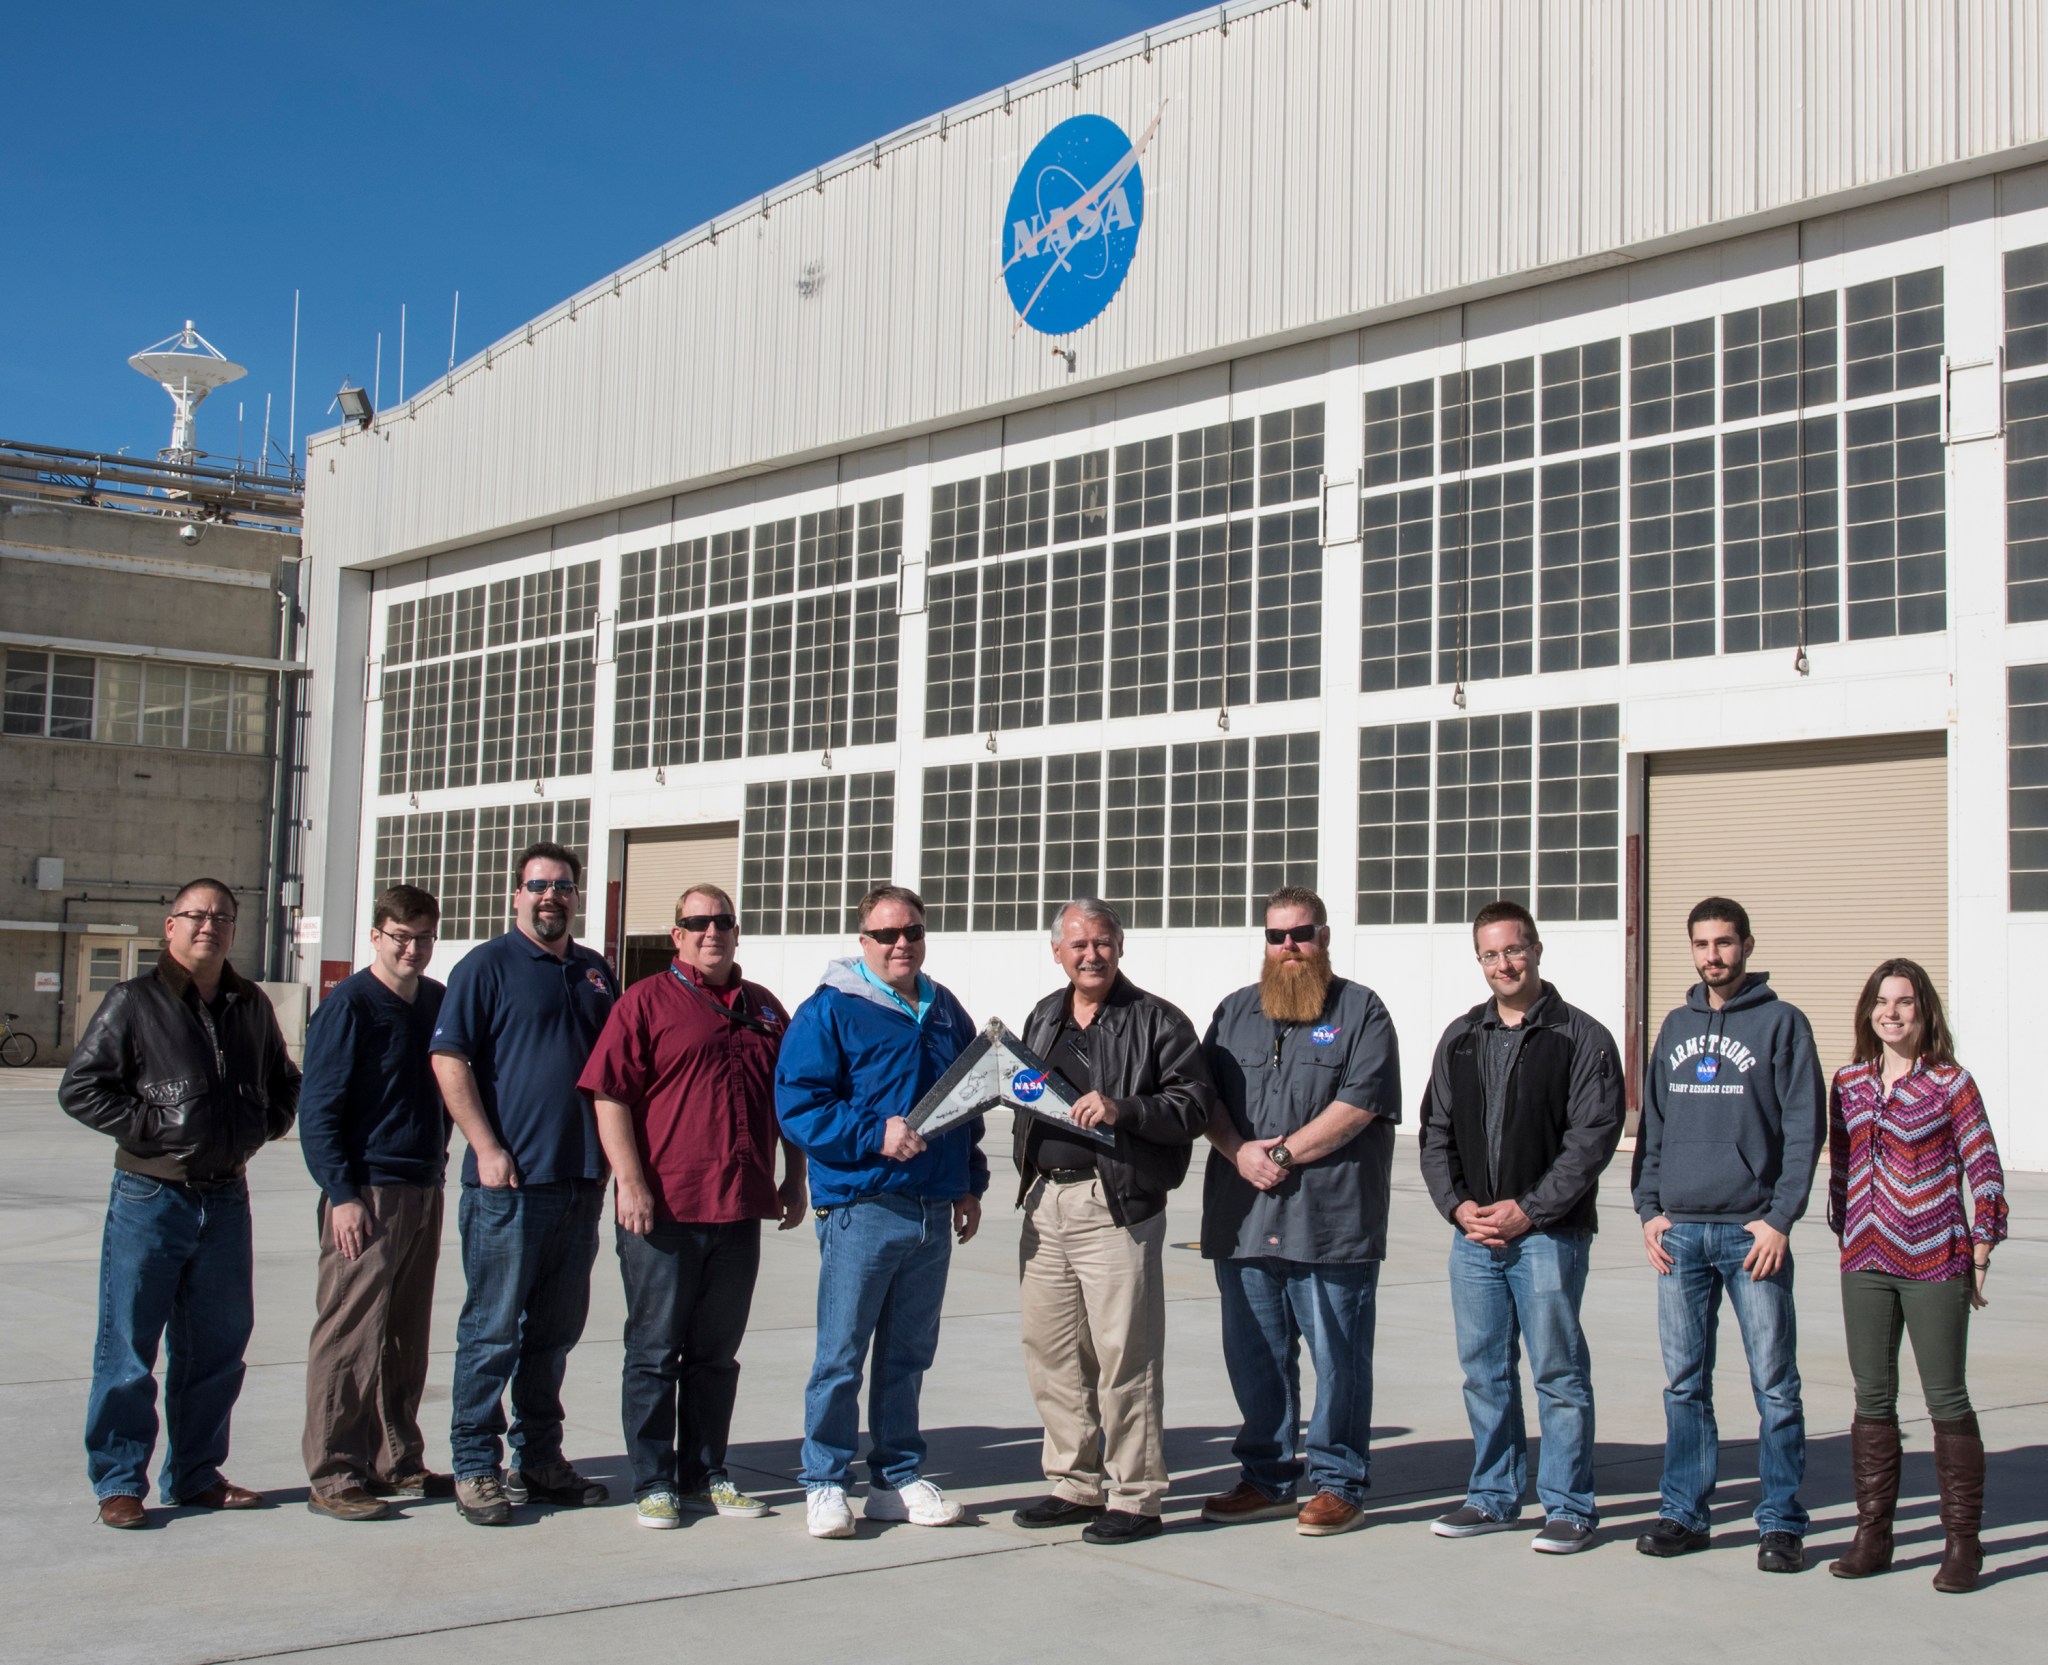 The WHAATRR team from NASA Armstrong.